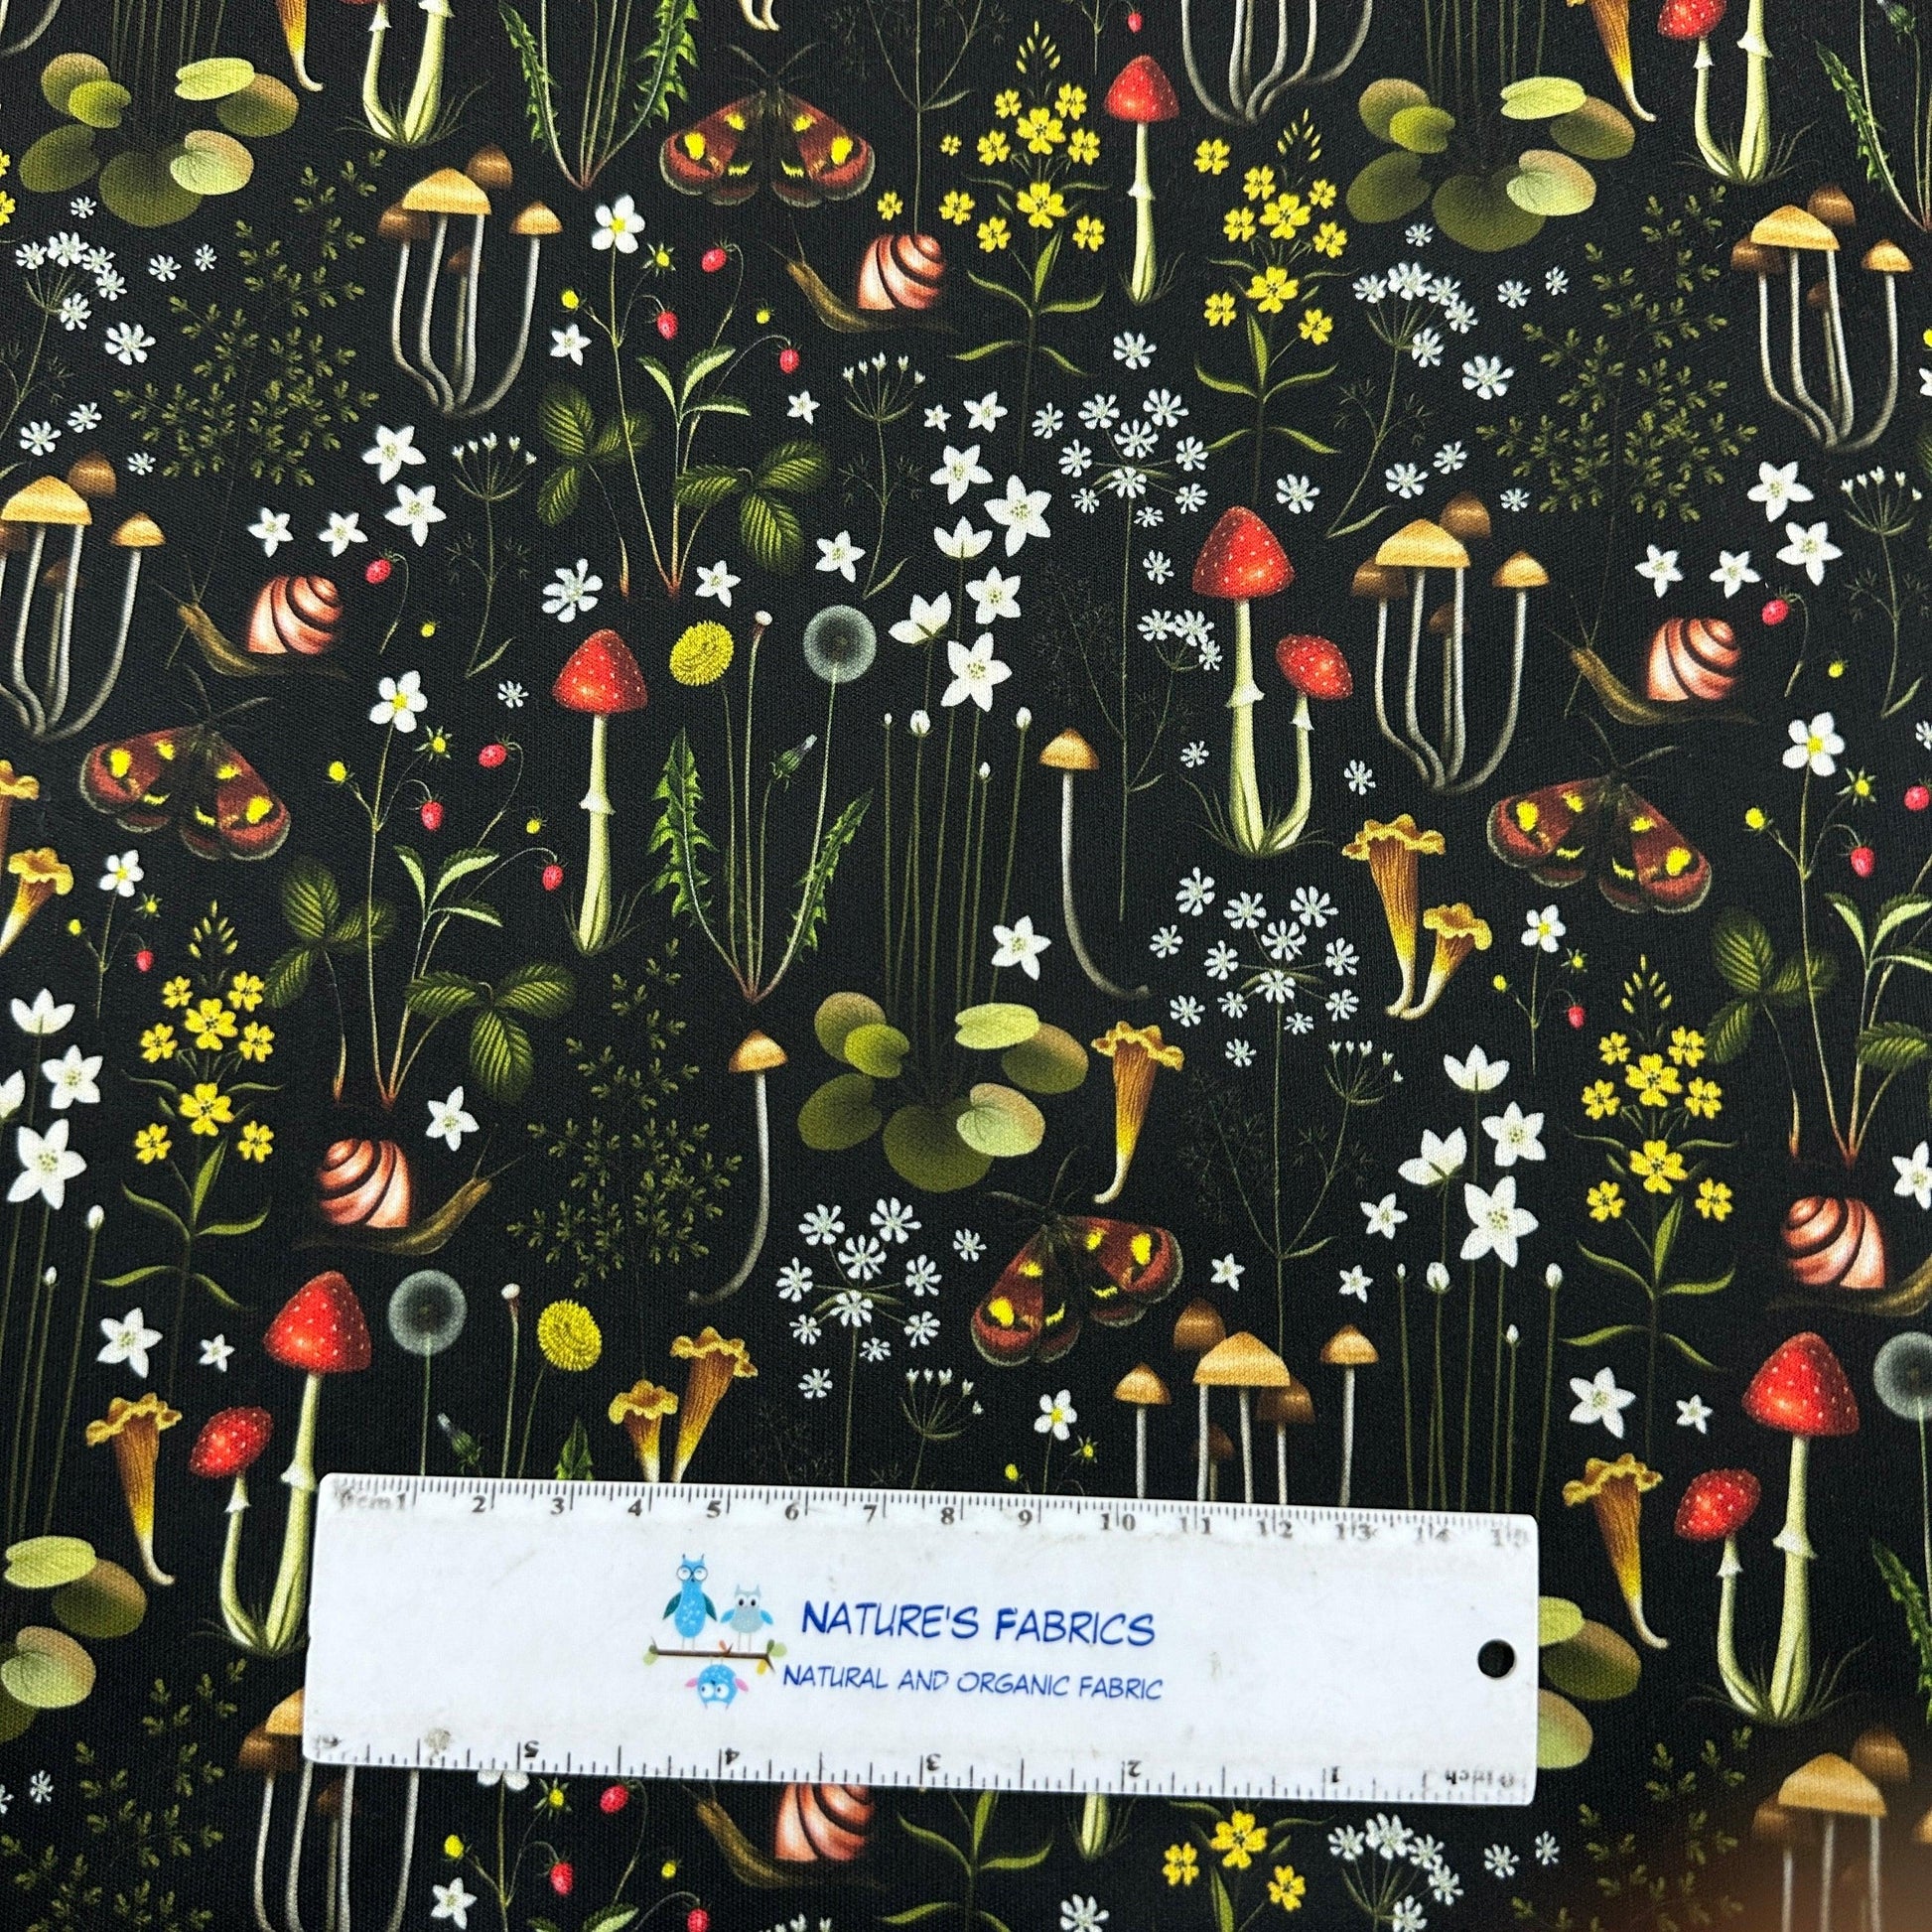 Forest Florals on Black 1 mil PUL Fabric - Made in the USA - Nature's Fabrics